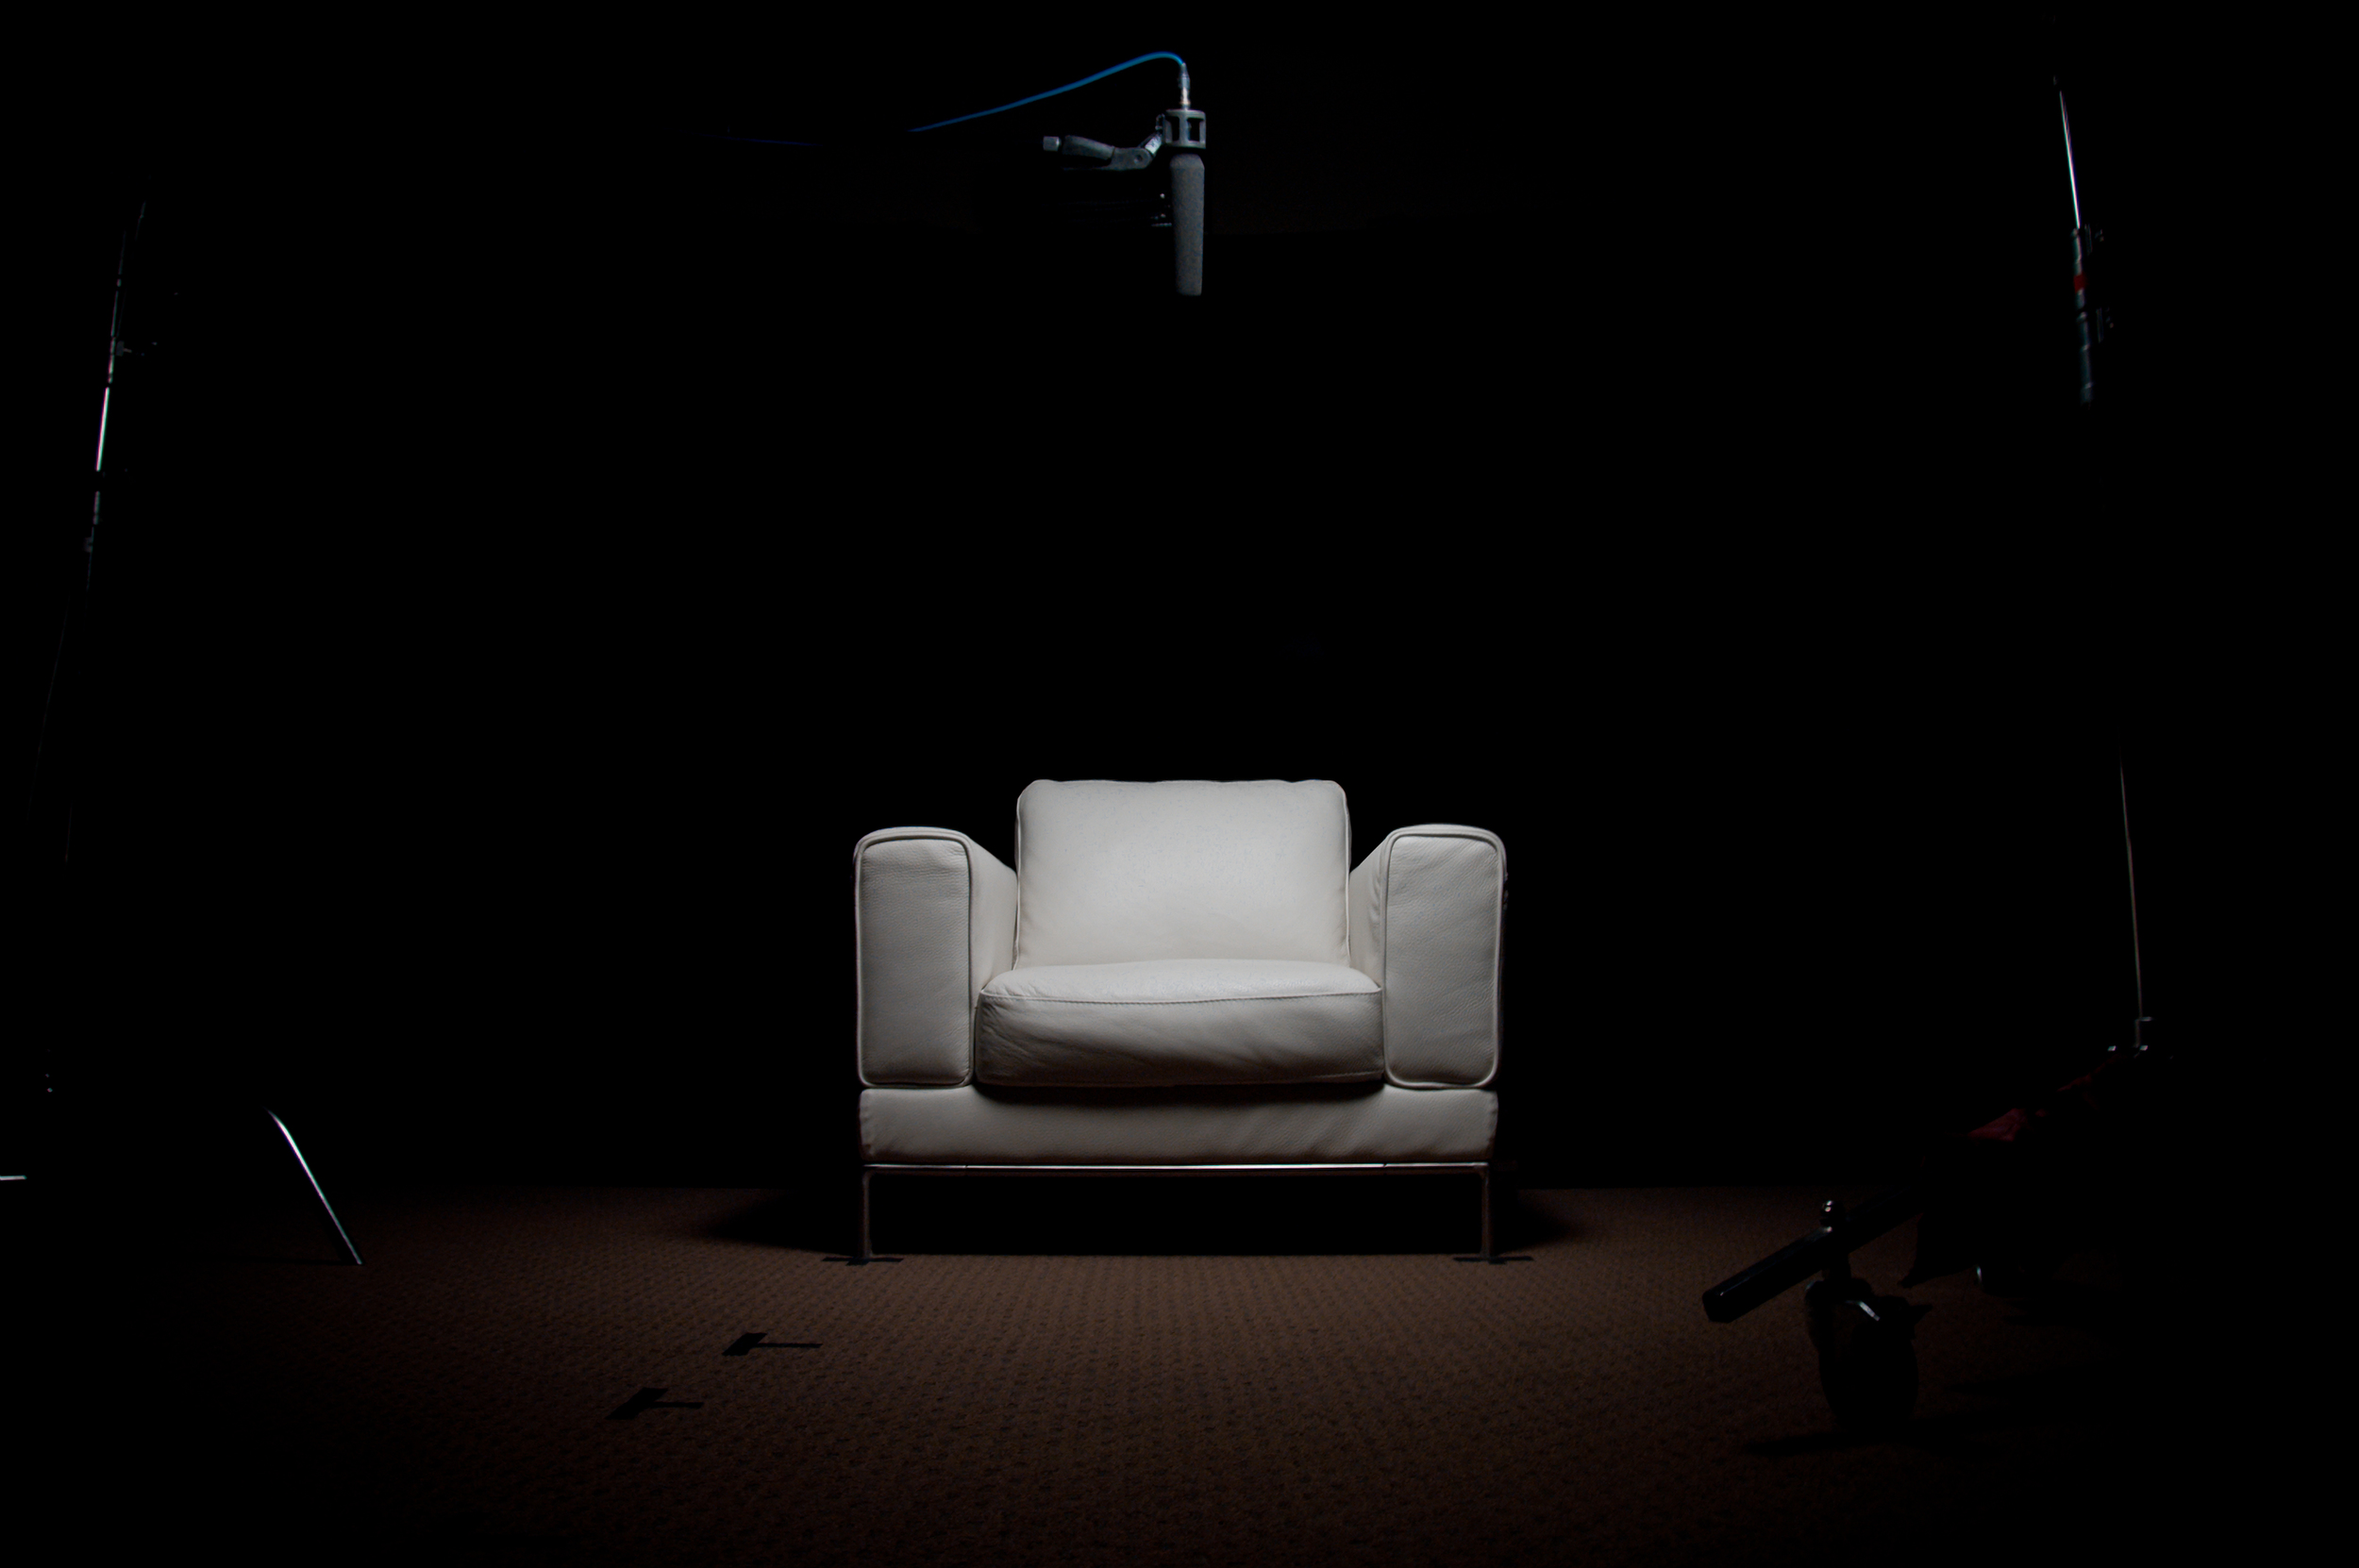  This iconic white chair ha s become the foundation of a storytelling movement that has impacted millions of people in nations around the world.  